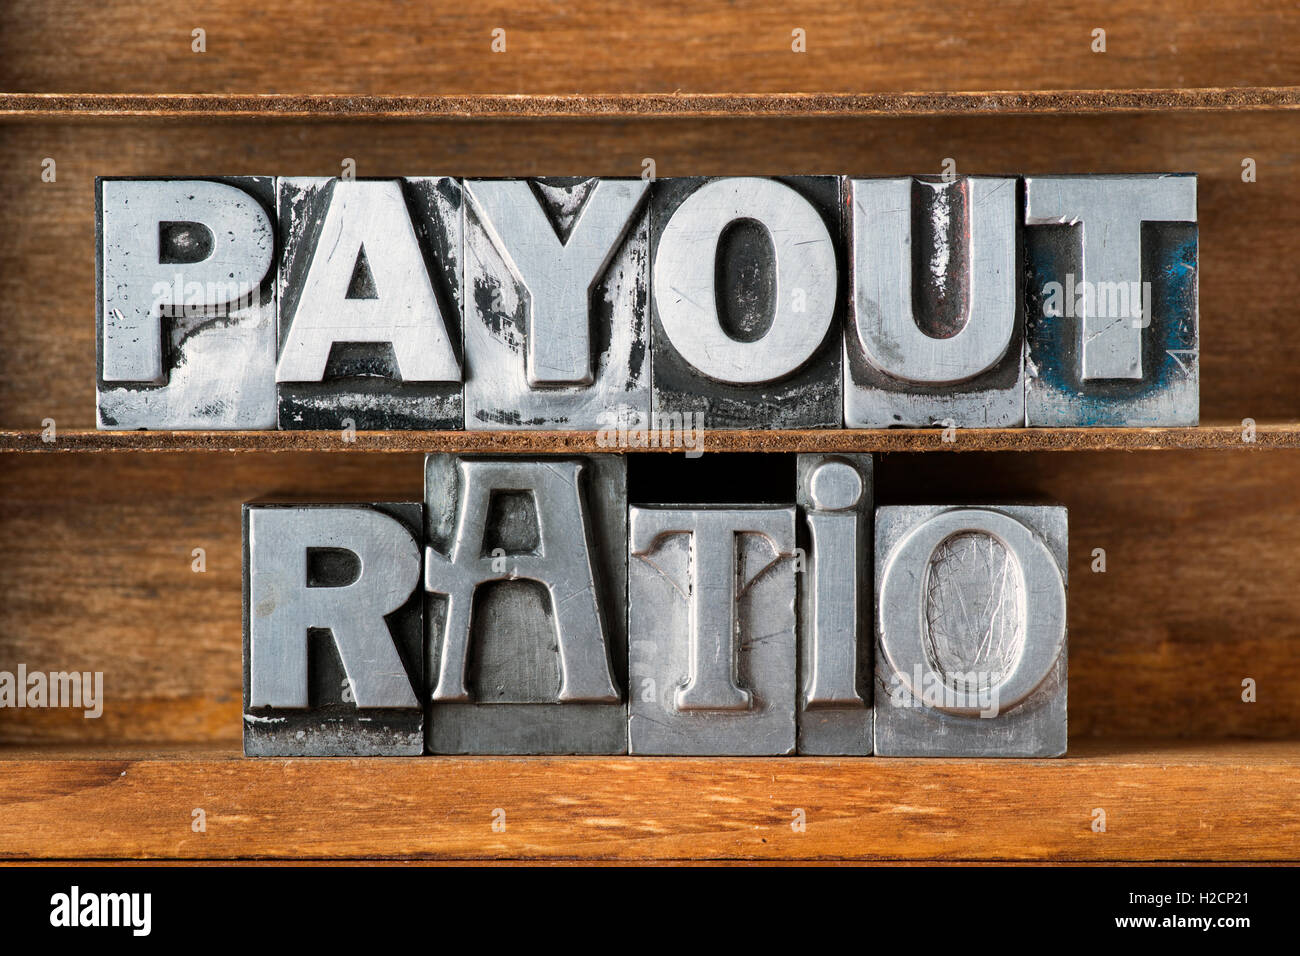 payout ratio phrase made from metallic letterpress type on wooden tray Stock Photo